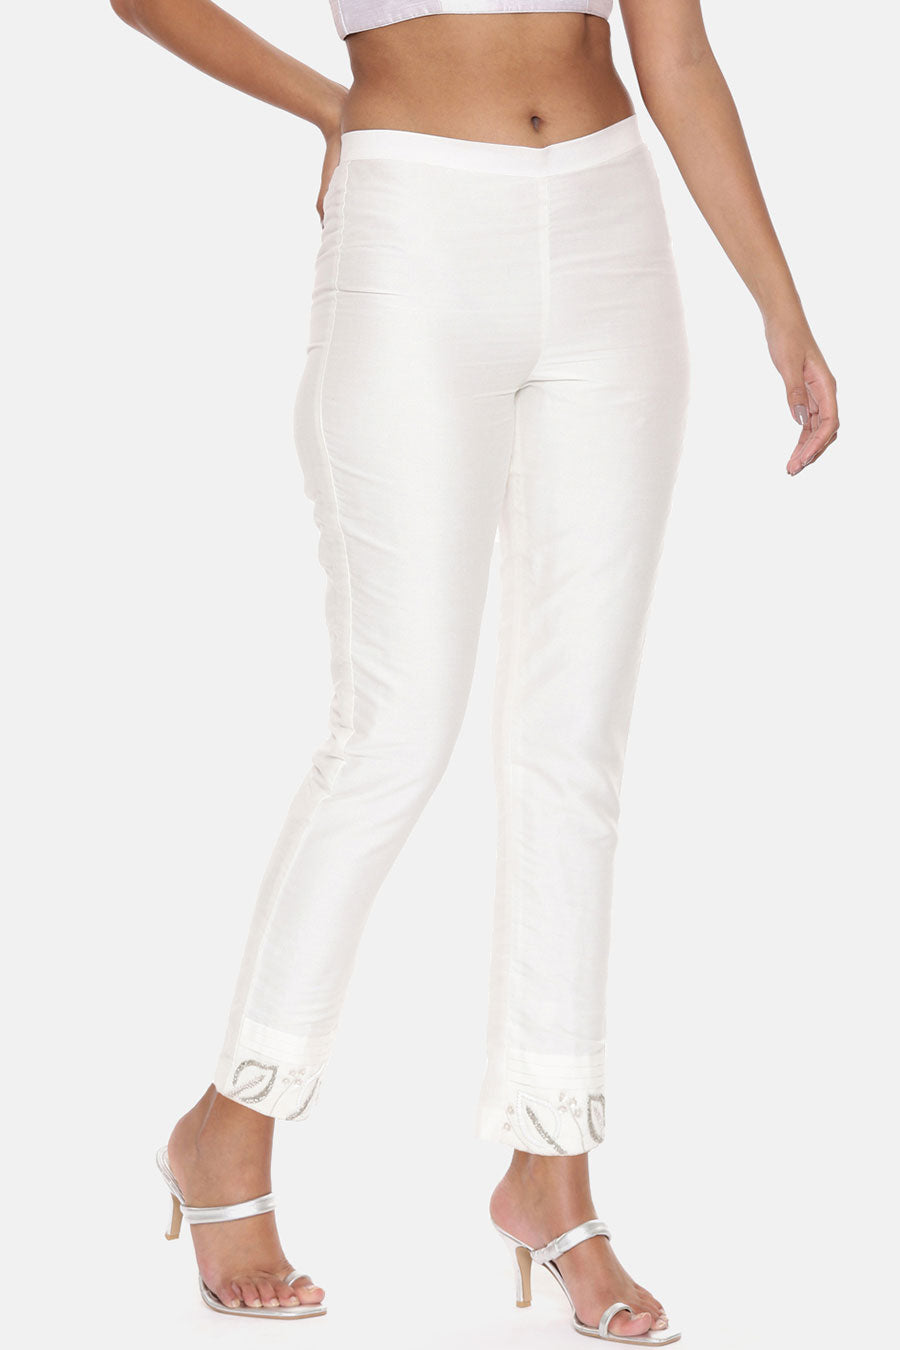 White Embroidered Pants